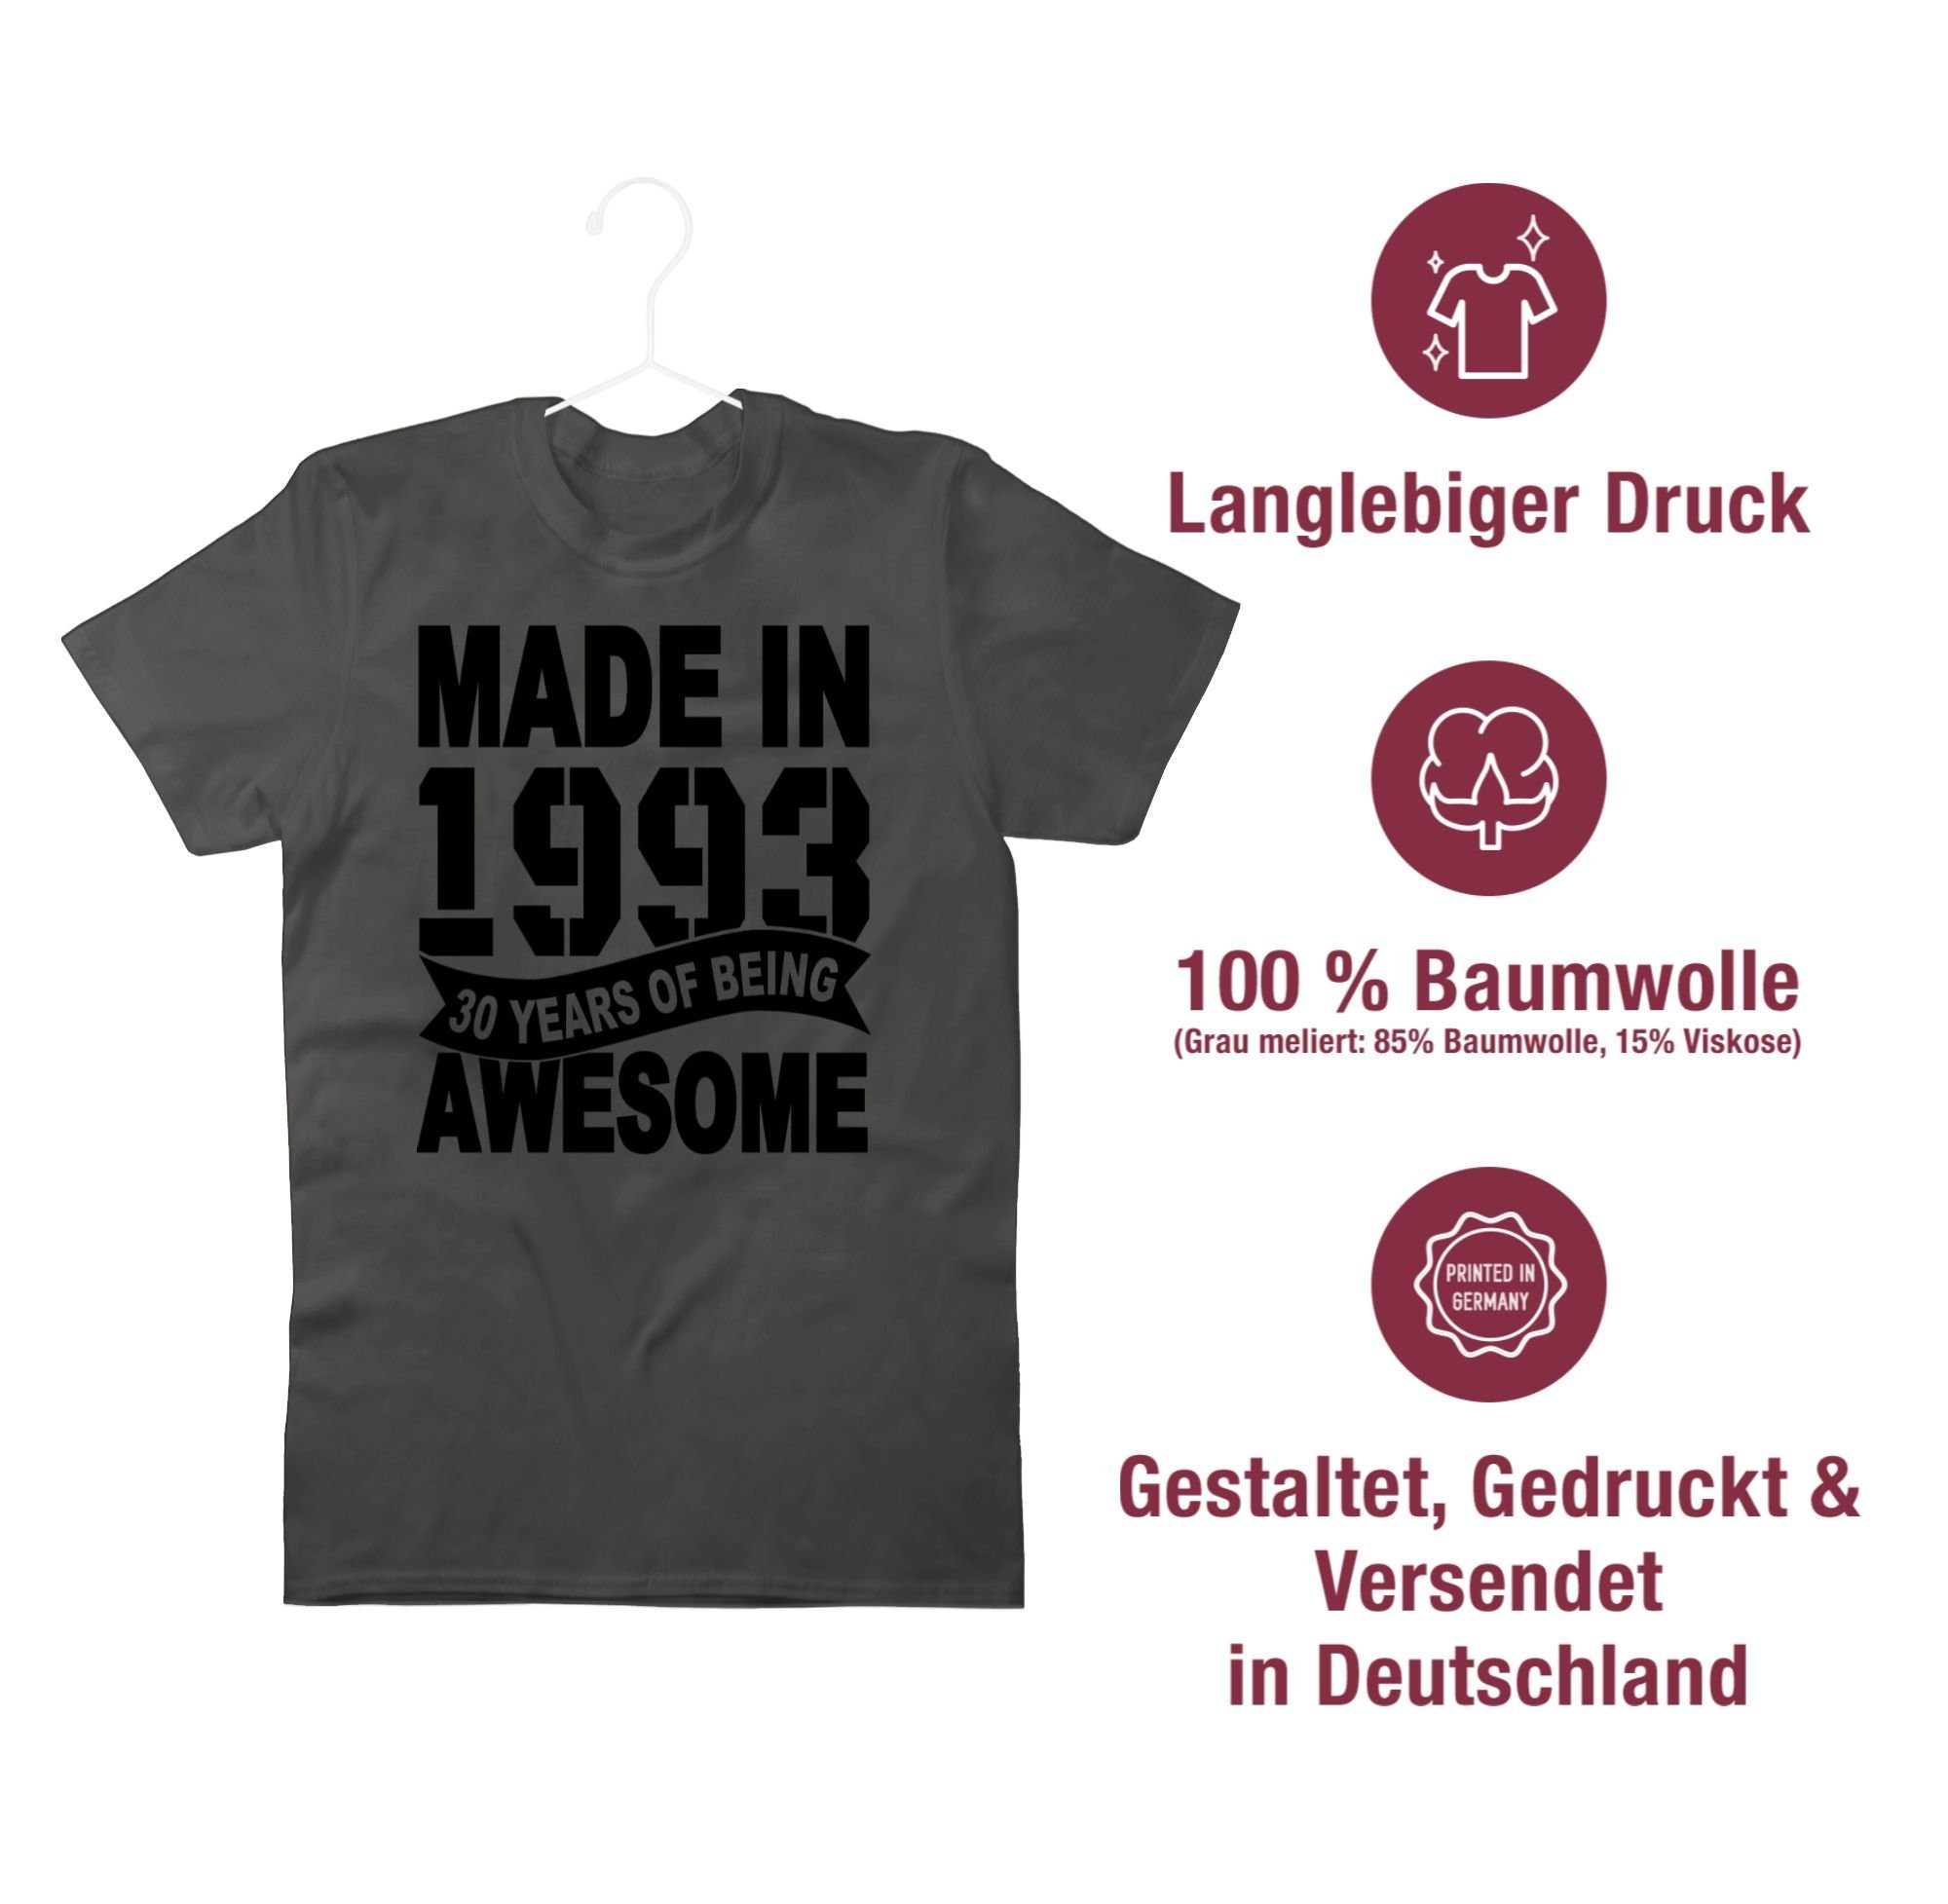 Shirtracer being 1 30. Made Geburtstag Thirty T-Shirt schwarz in of years Dunkelgrau awesome 1993